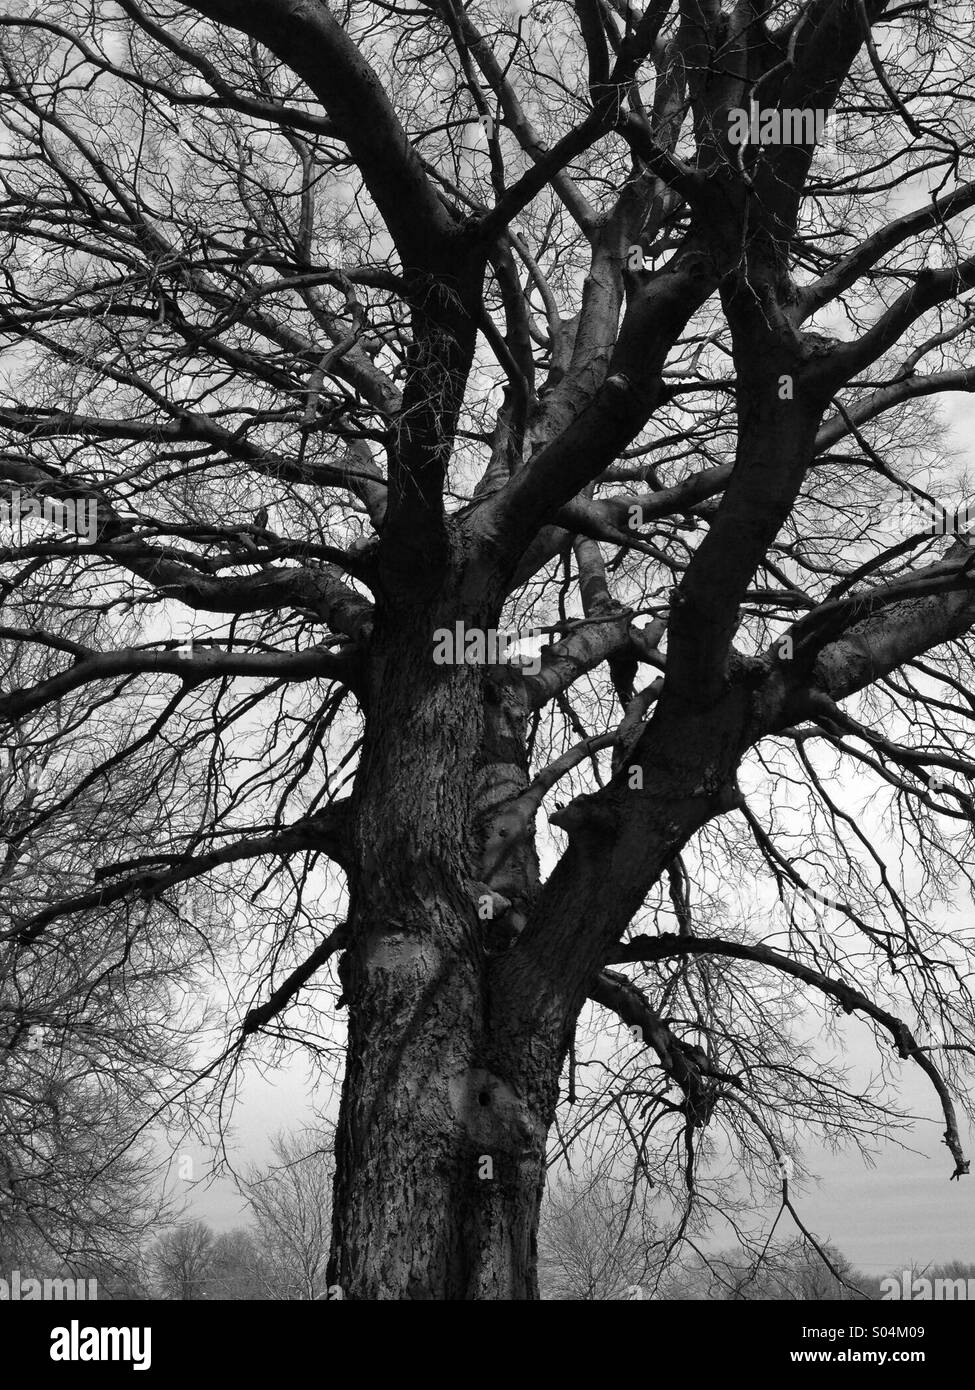 A grand old tree in the winter with no leaves Stock Photo